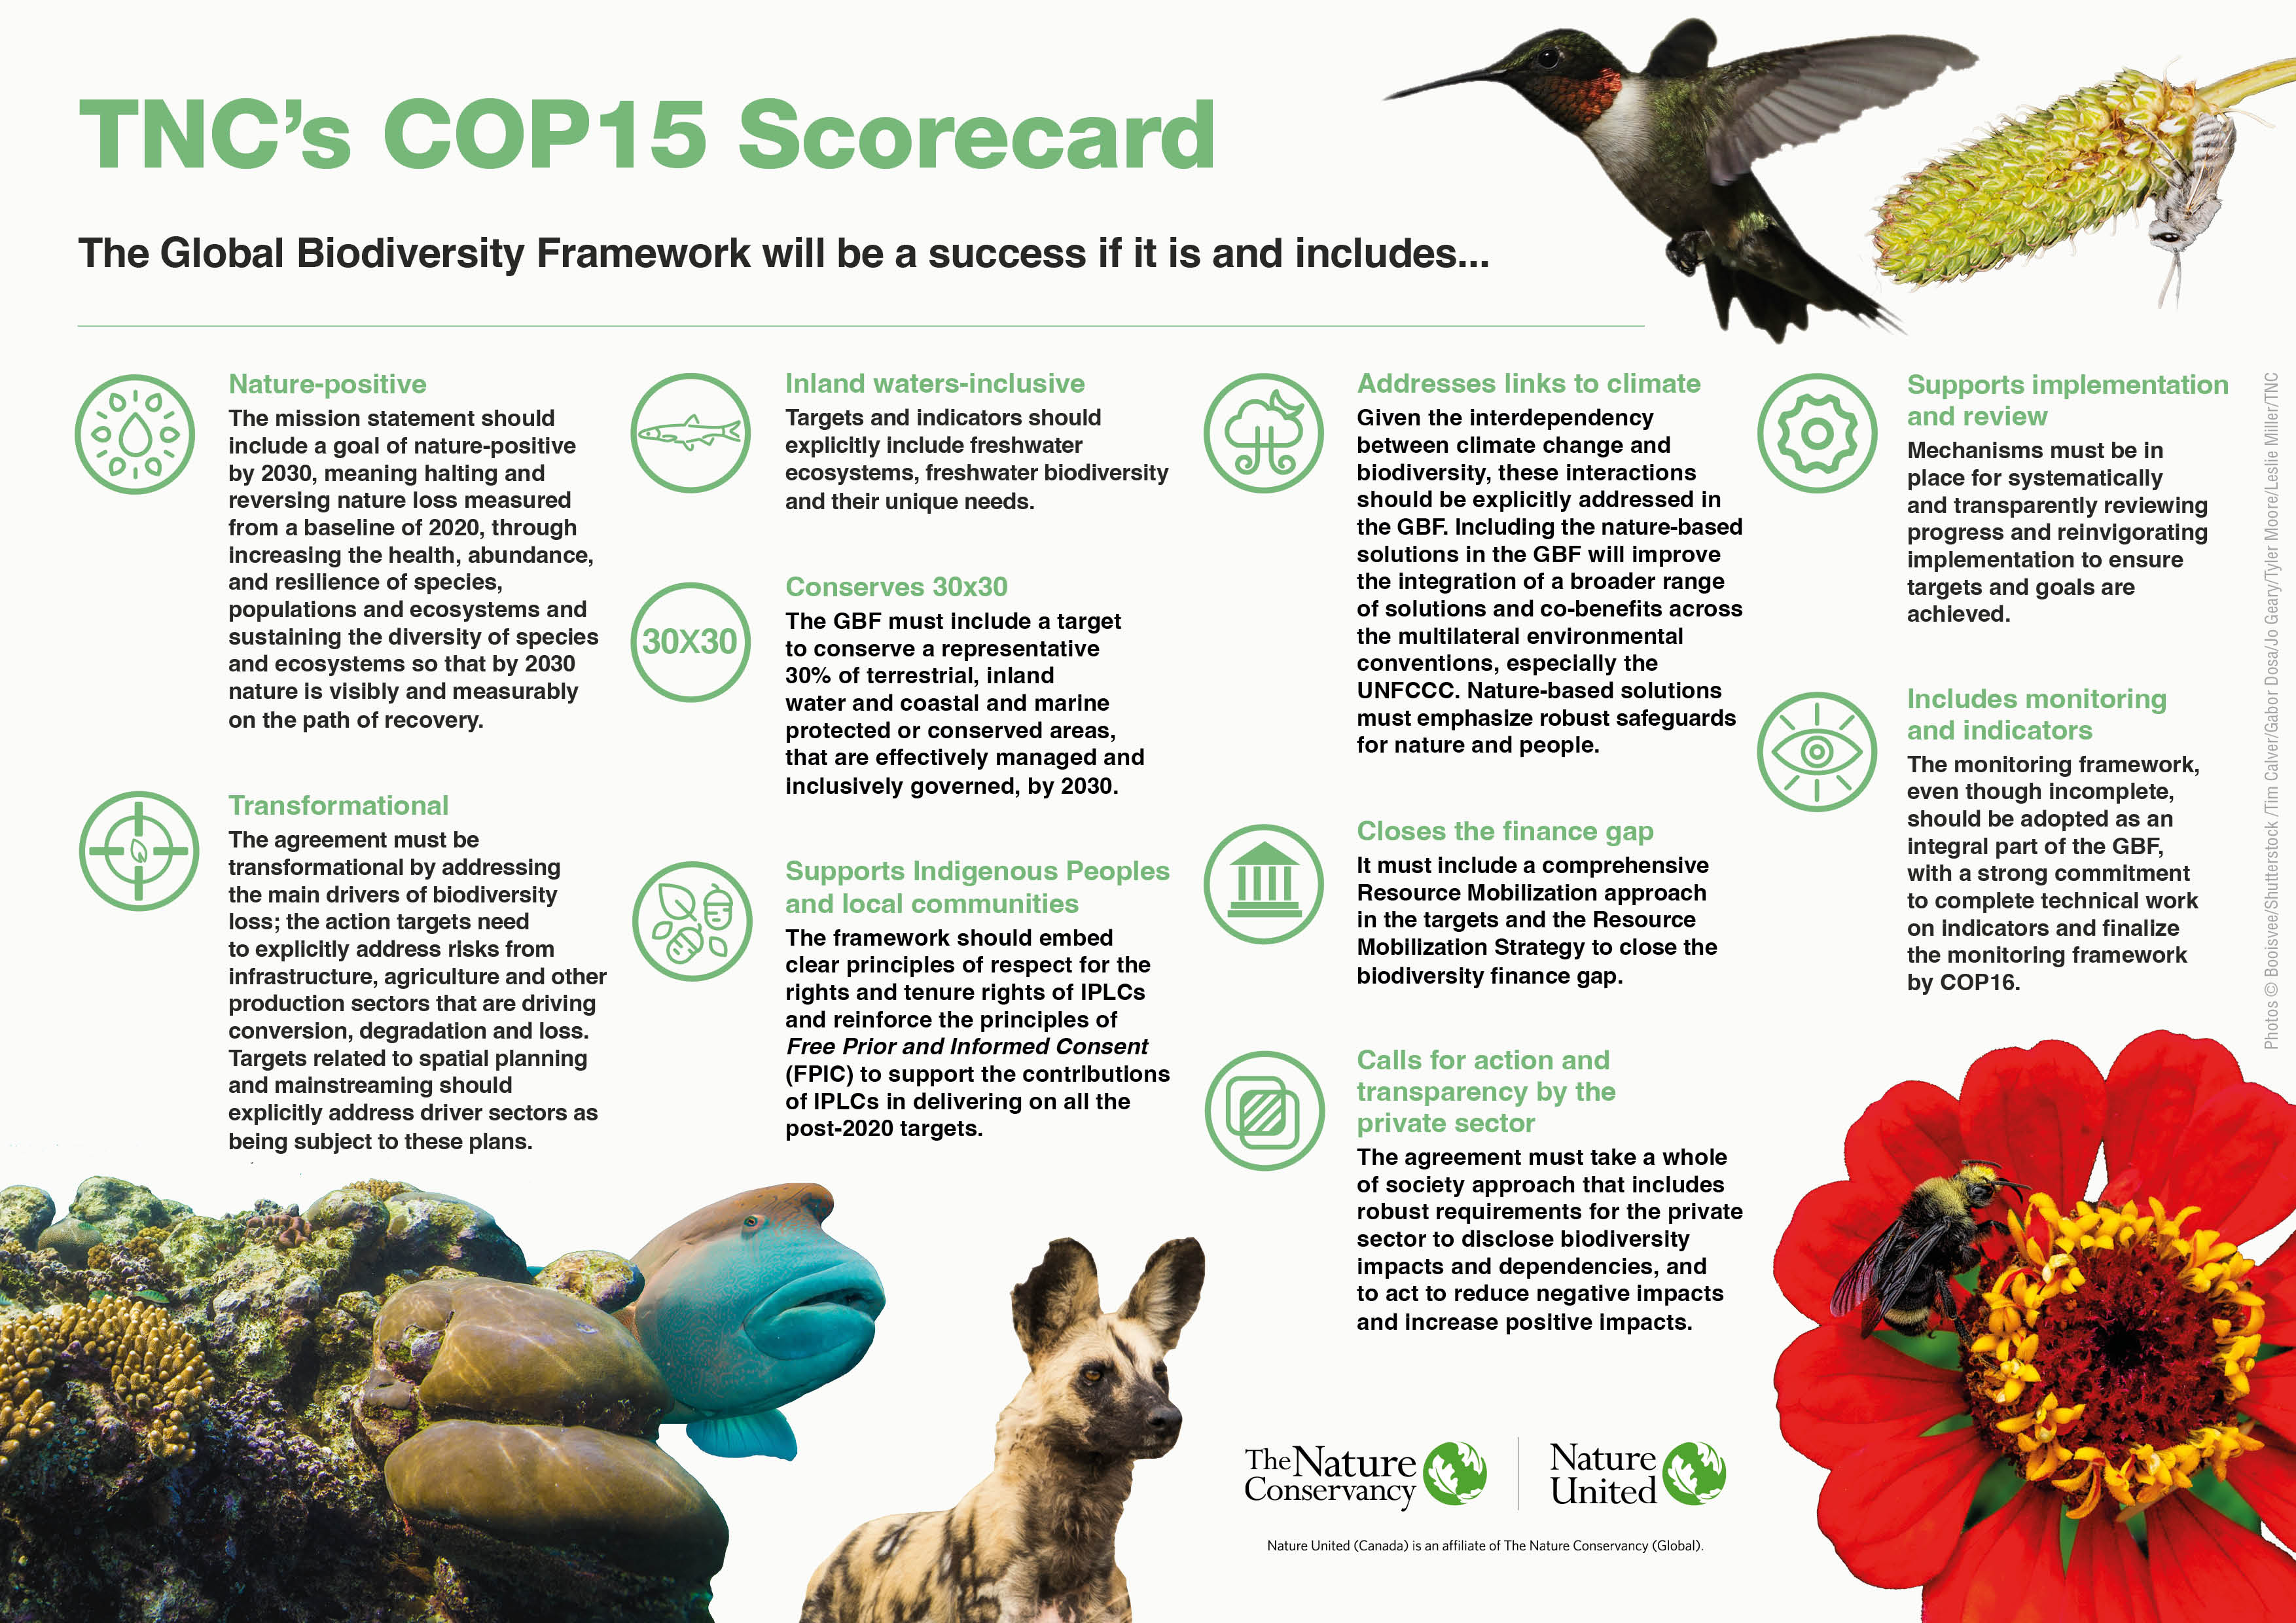 Image of an infographic showing the 10 elements of what would make the COP15 biodiversity conference a success.